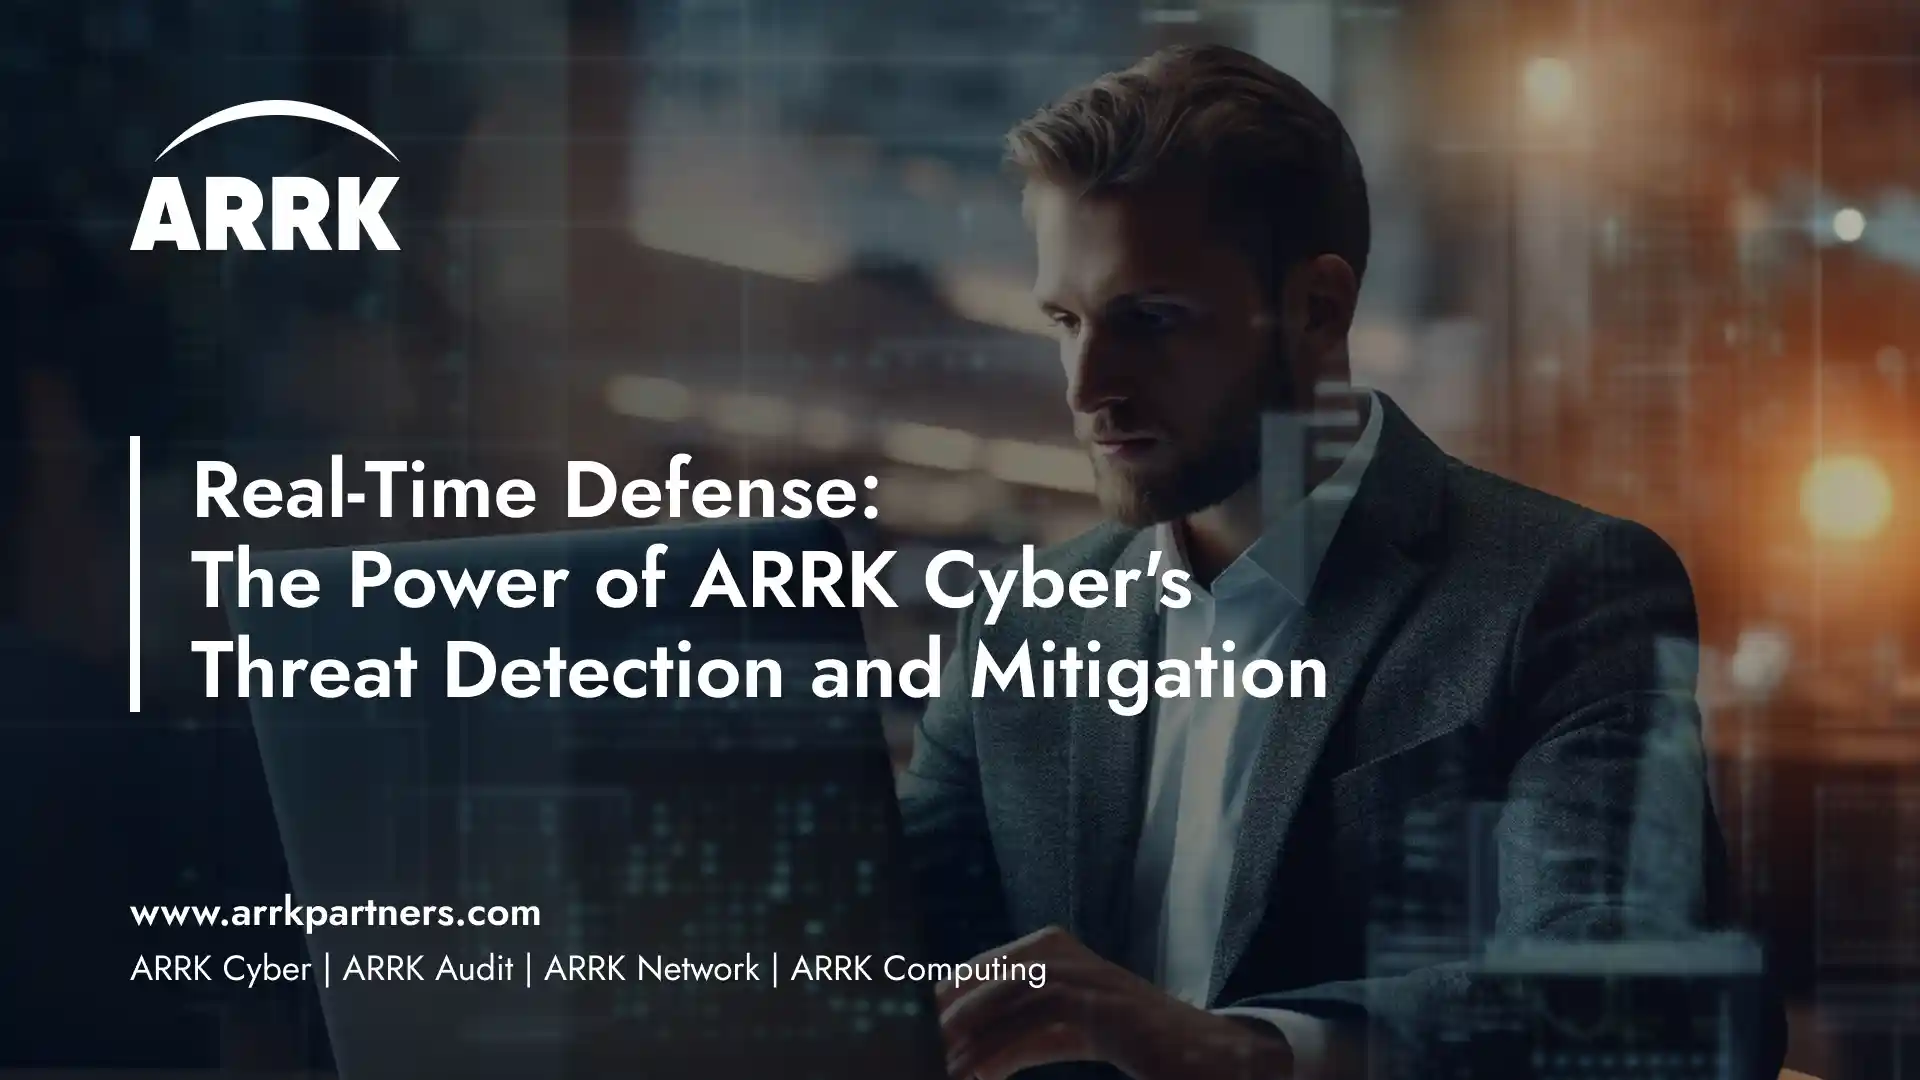 Power of ARRK Cyber's Threat Detection and Mitigation